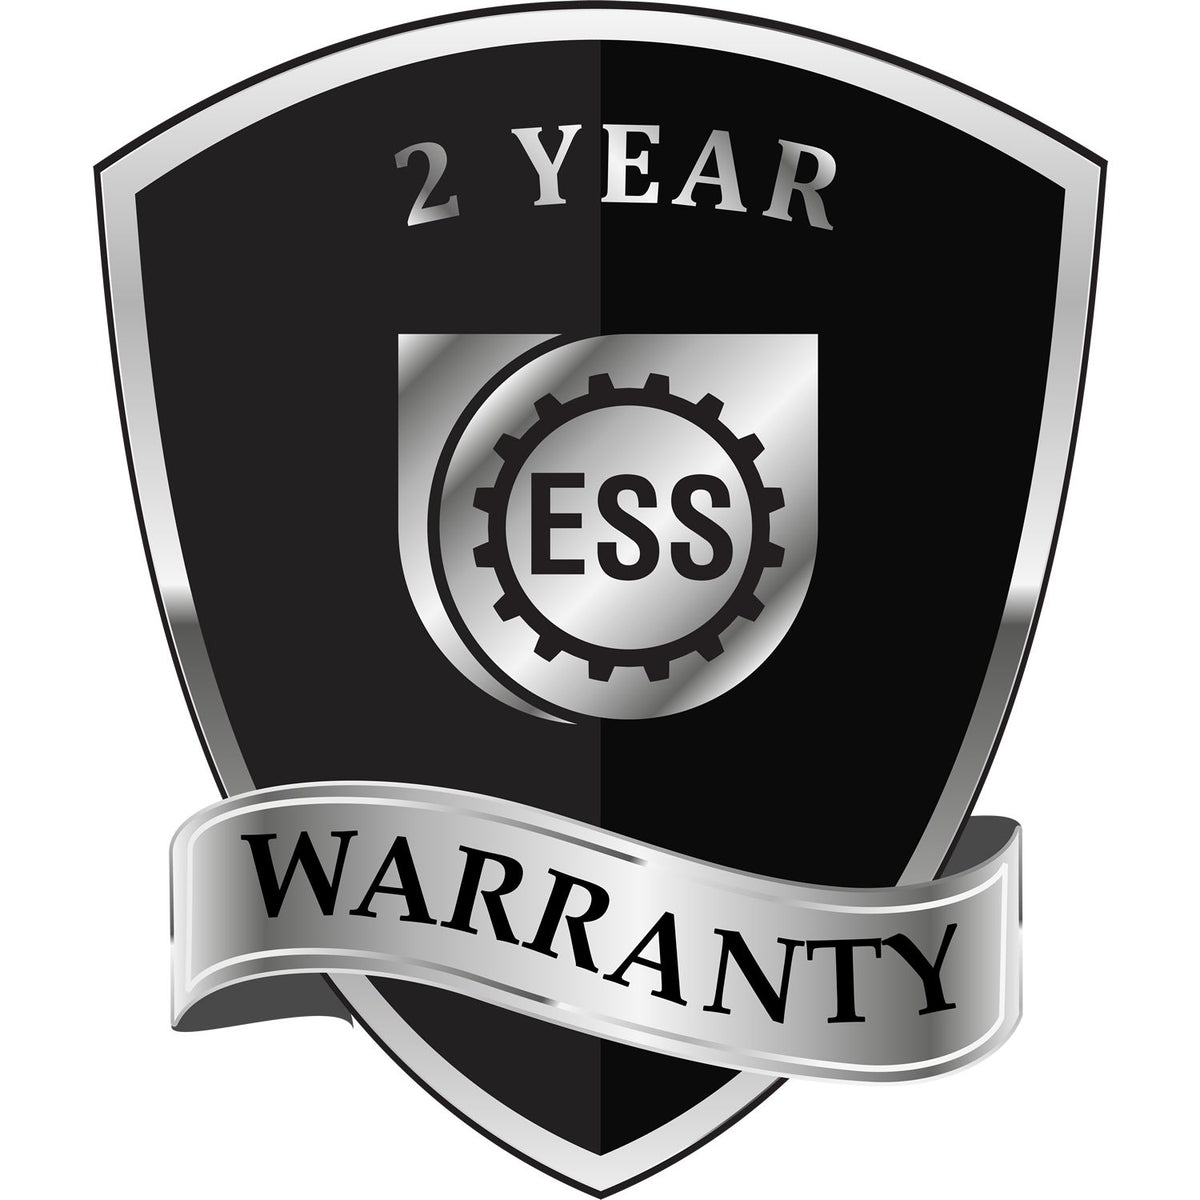 A black and silver badge or emblem showing warranty information for the Handheld Texas Professional Geologist Embosser